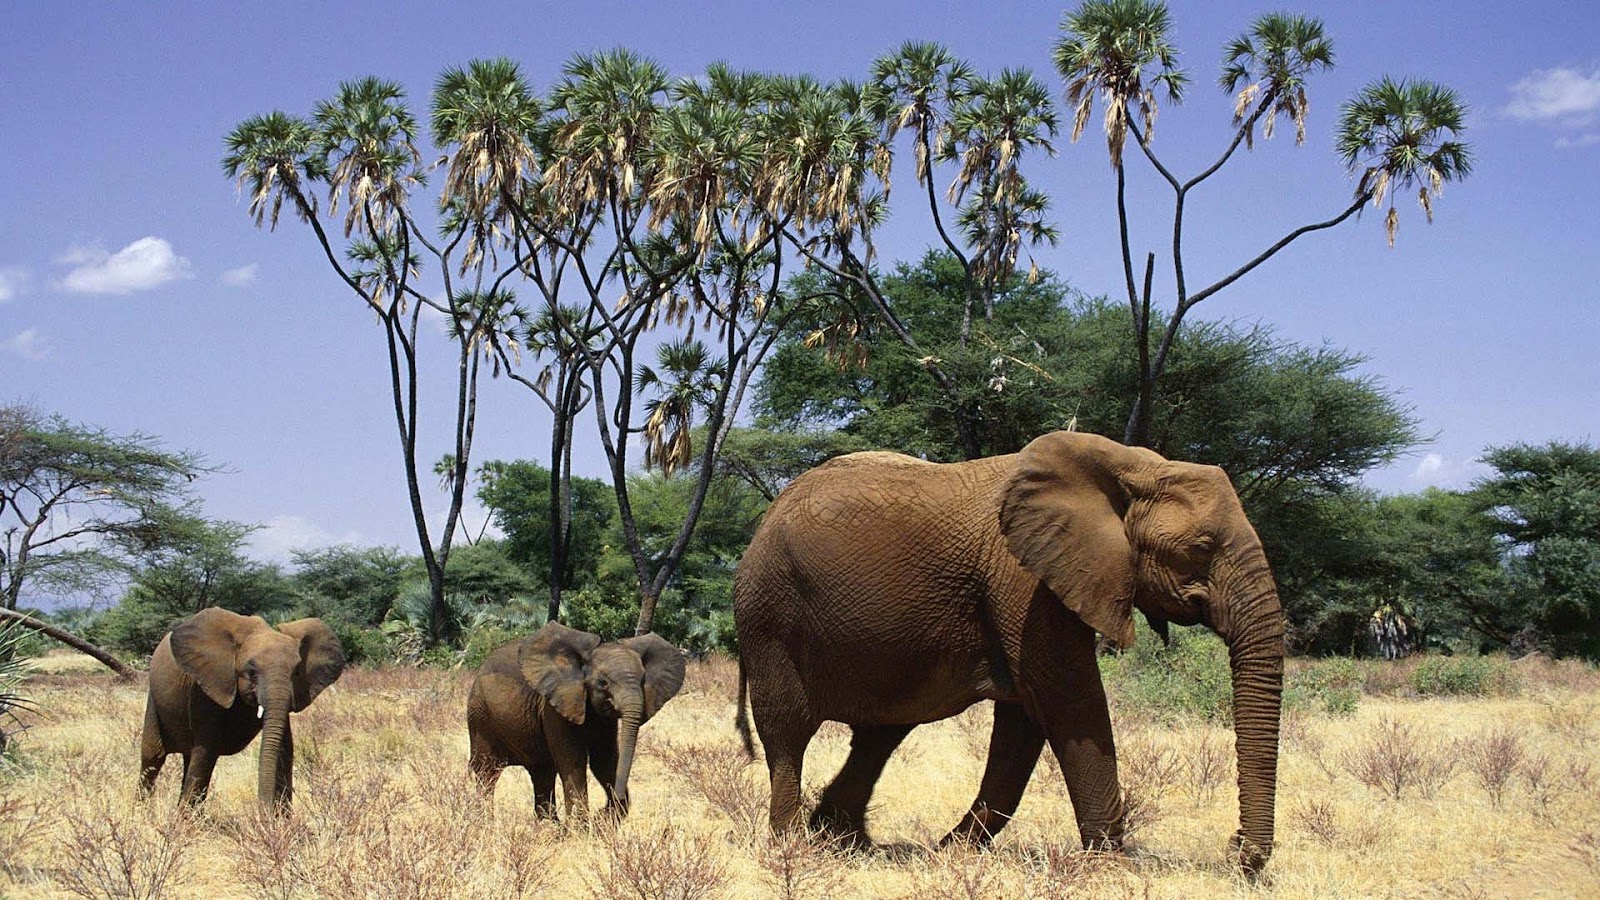 http://4.bp.blogspot.com/-O0fgHqlzUgU/UCfGtrf_aJI/AAAAAAAAAcE/LQWIdLksRrY/s1600/hd-african-elephants-wallpapers-with-mother-elephant-and-his-young-elephants-wallpaper-background.jpg